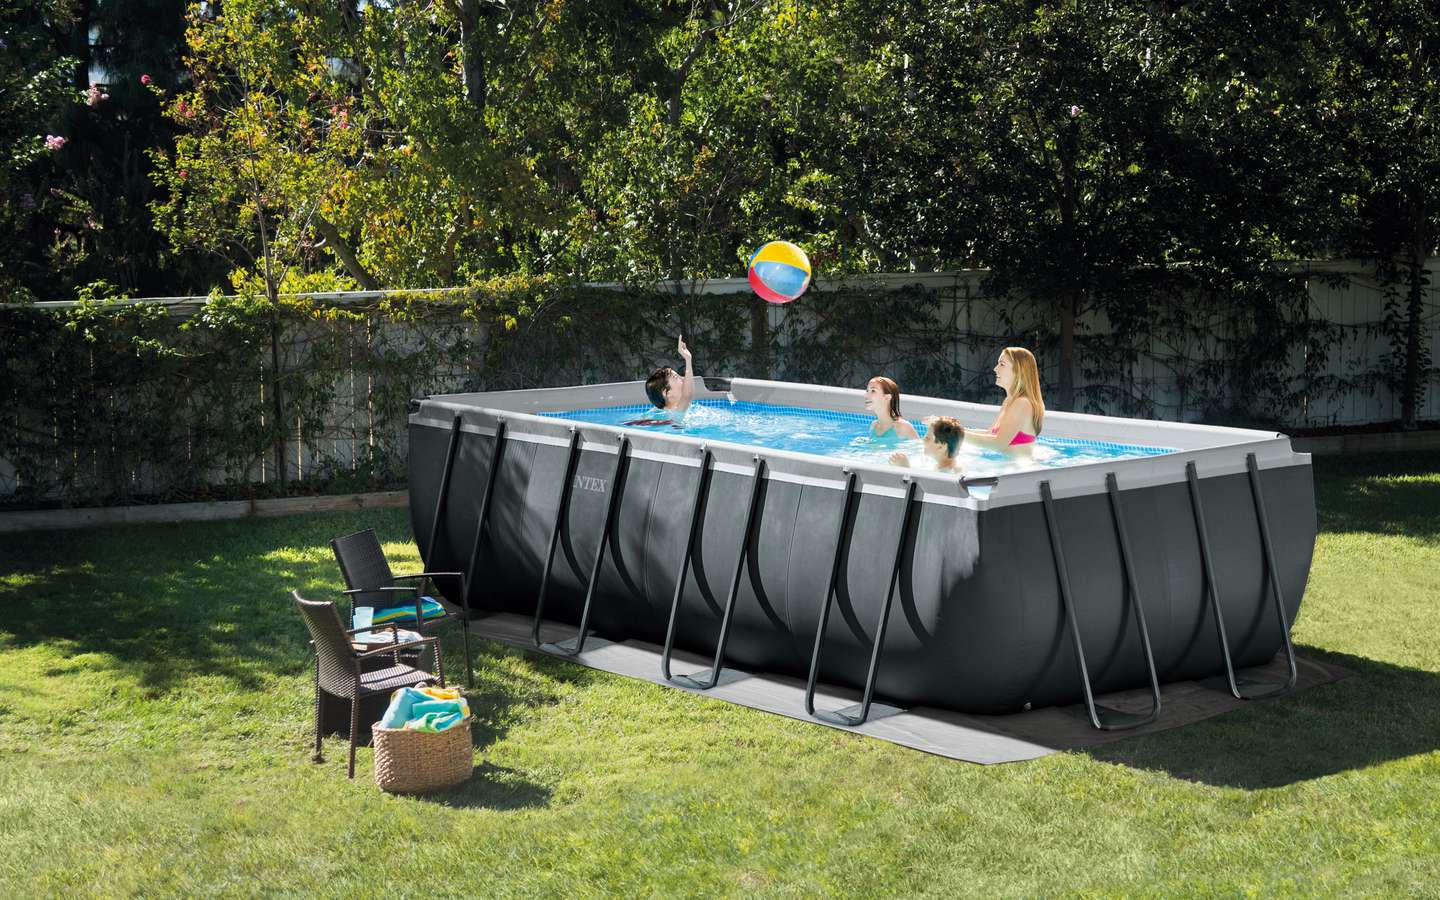 Comment couvrir une piscine ronde ? - Baches PiscinesBaches Piscines